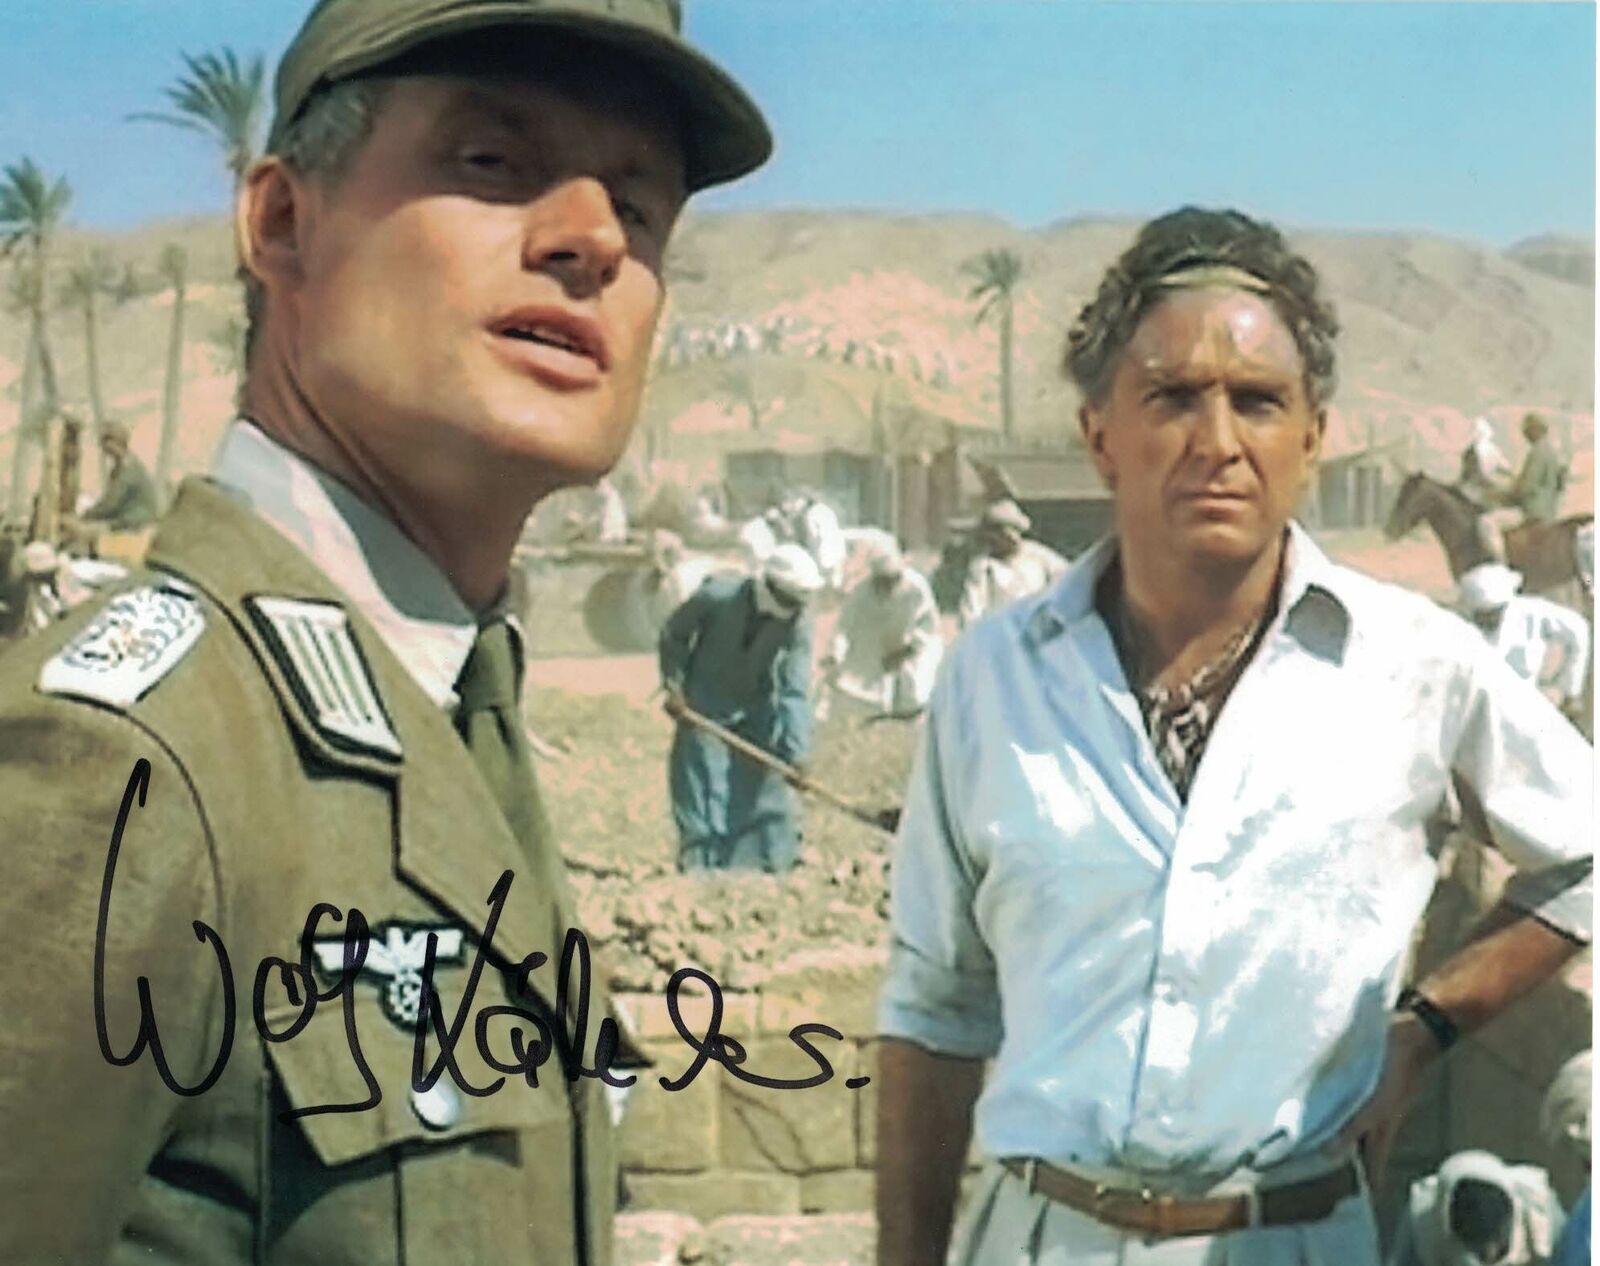 WOLF KAHLER - Dietrich in Raiders of The Lost Ark - hand signed 10 x 8 Photo Poster painting